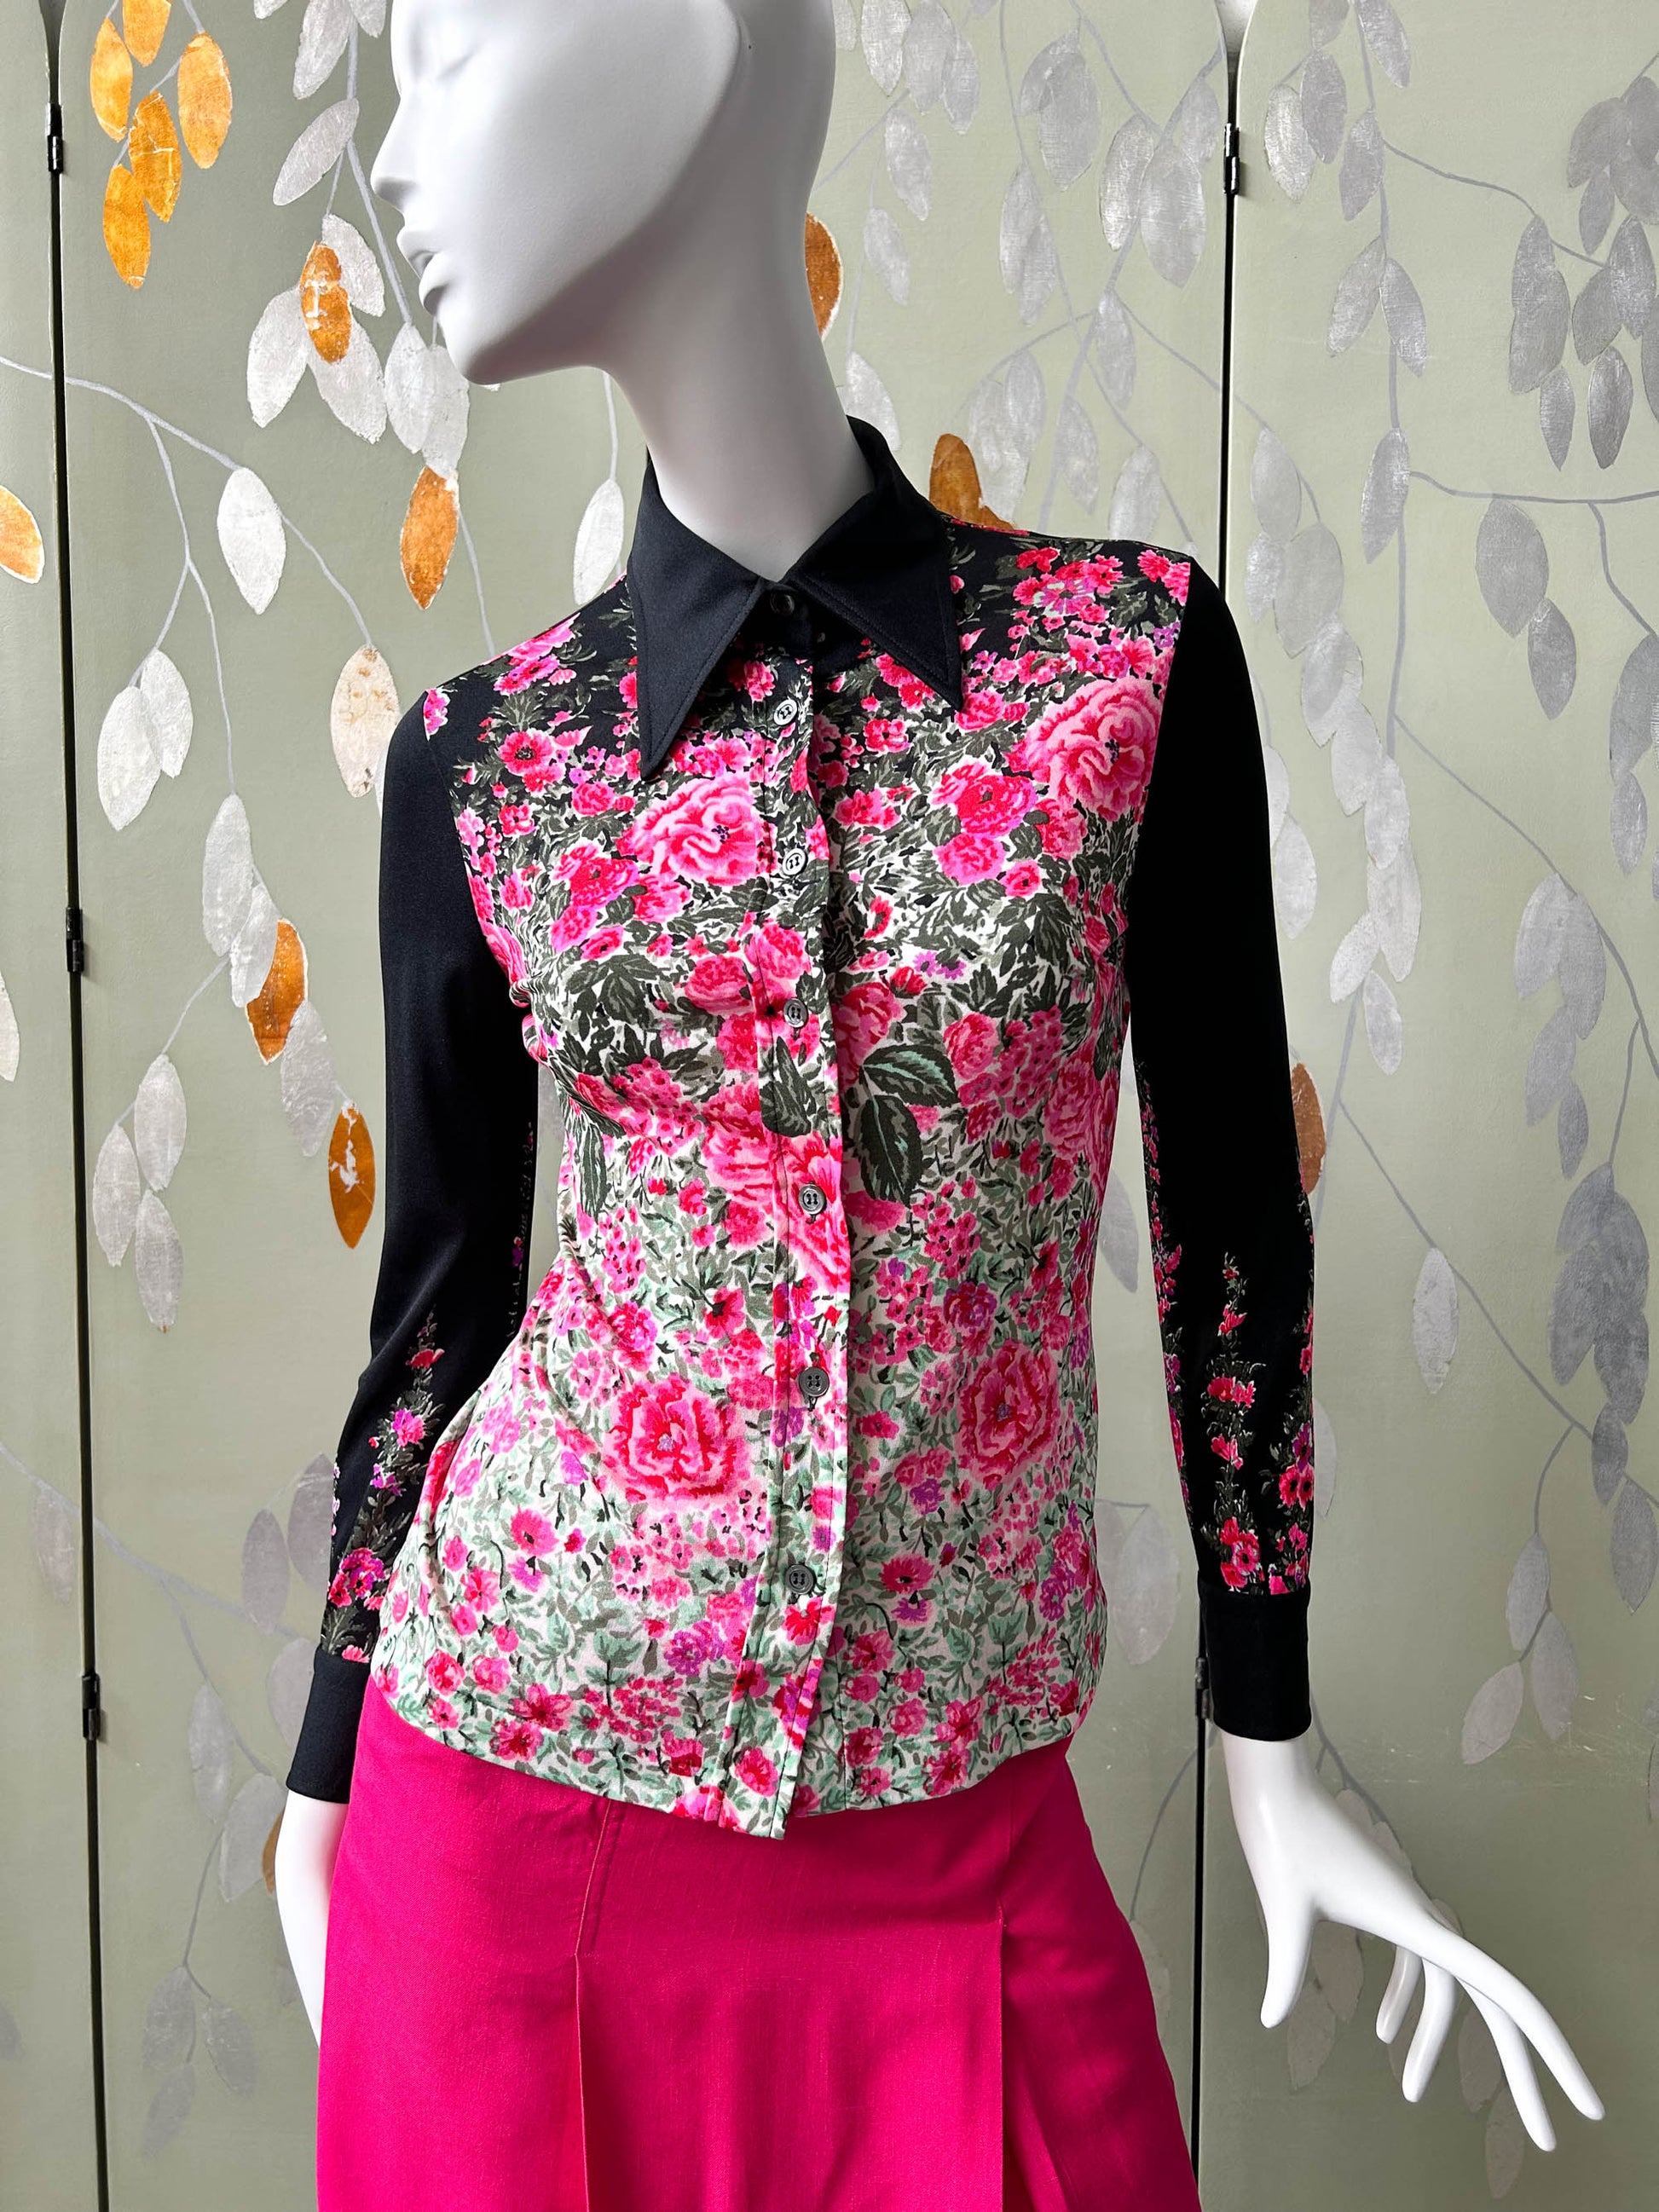 1960s 70s silk jerseyl floral collared button up shirt by Fashion Magazine made in Italy, Hot pink floral print against black vintage blouse